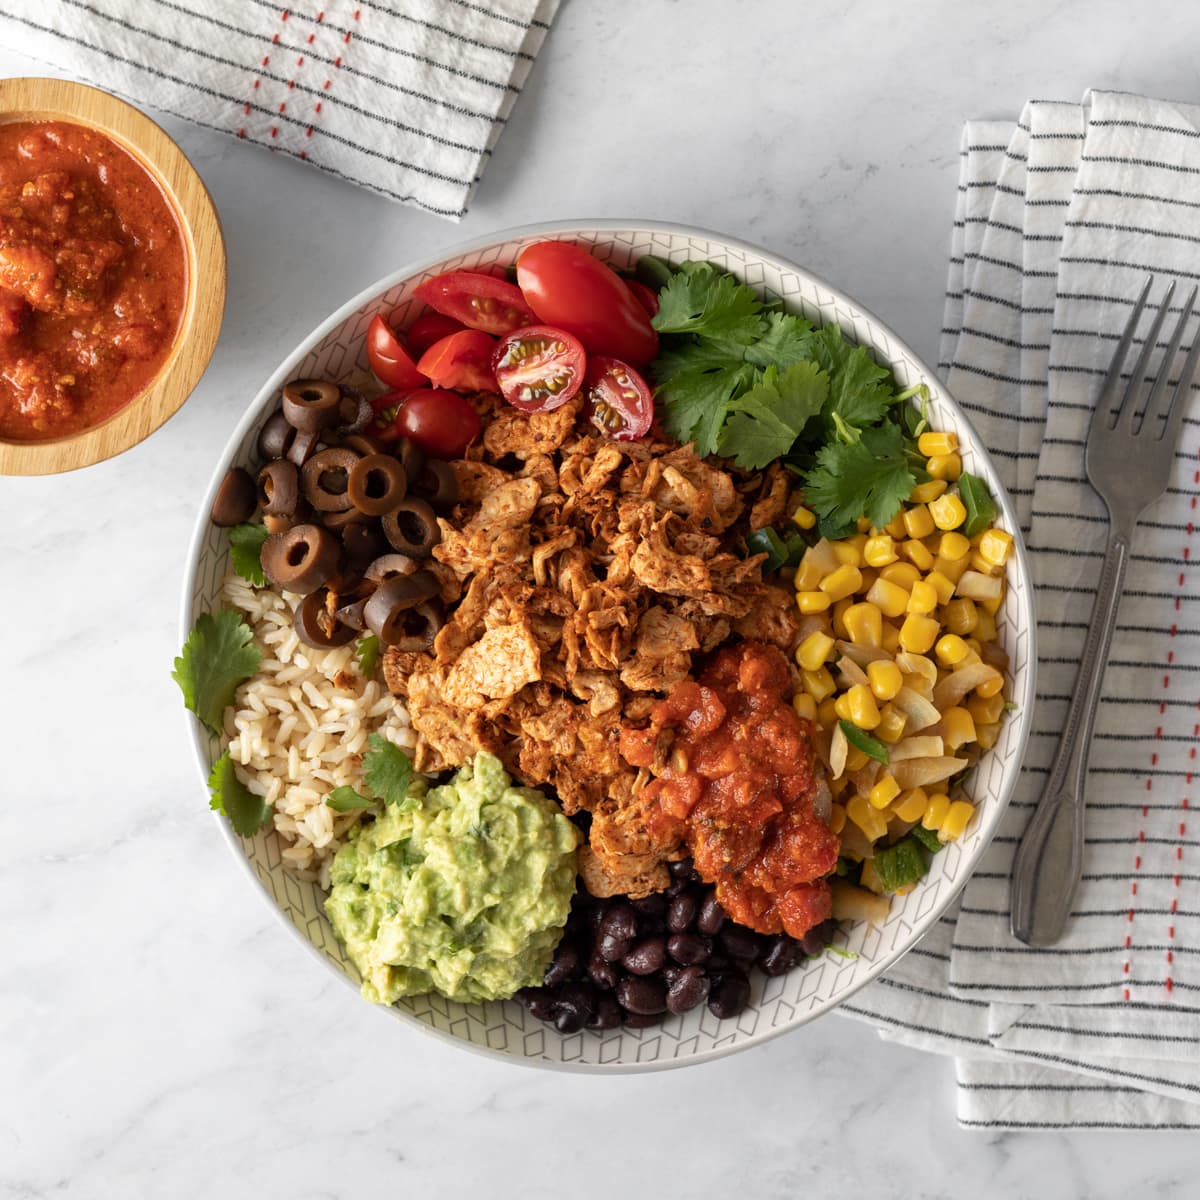 Taco Lunch Bowls - My Life After Dairy